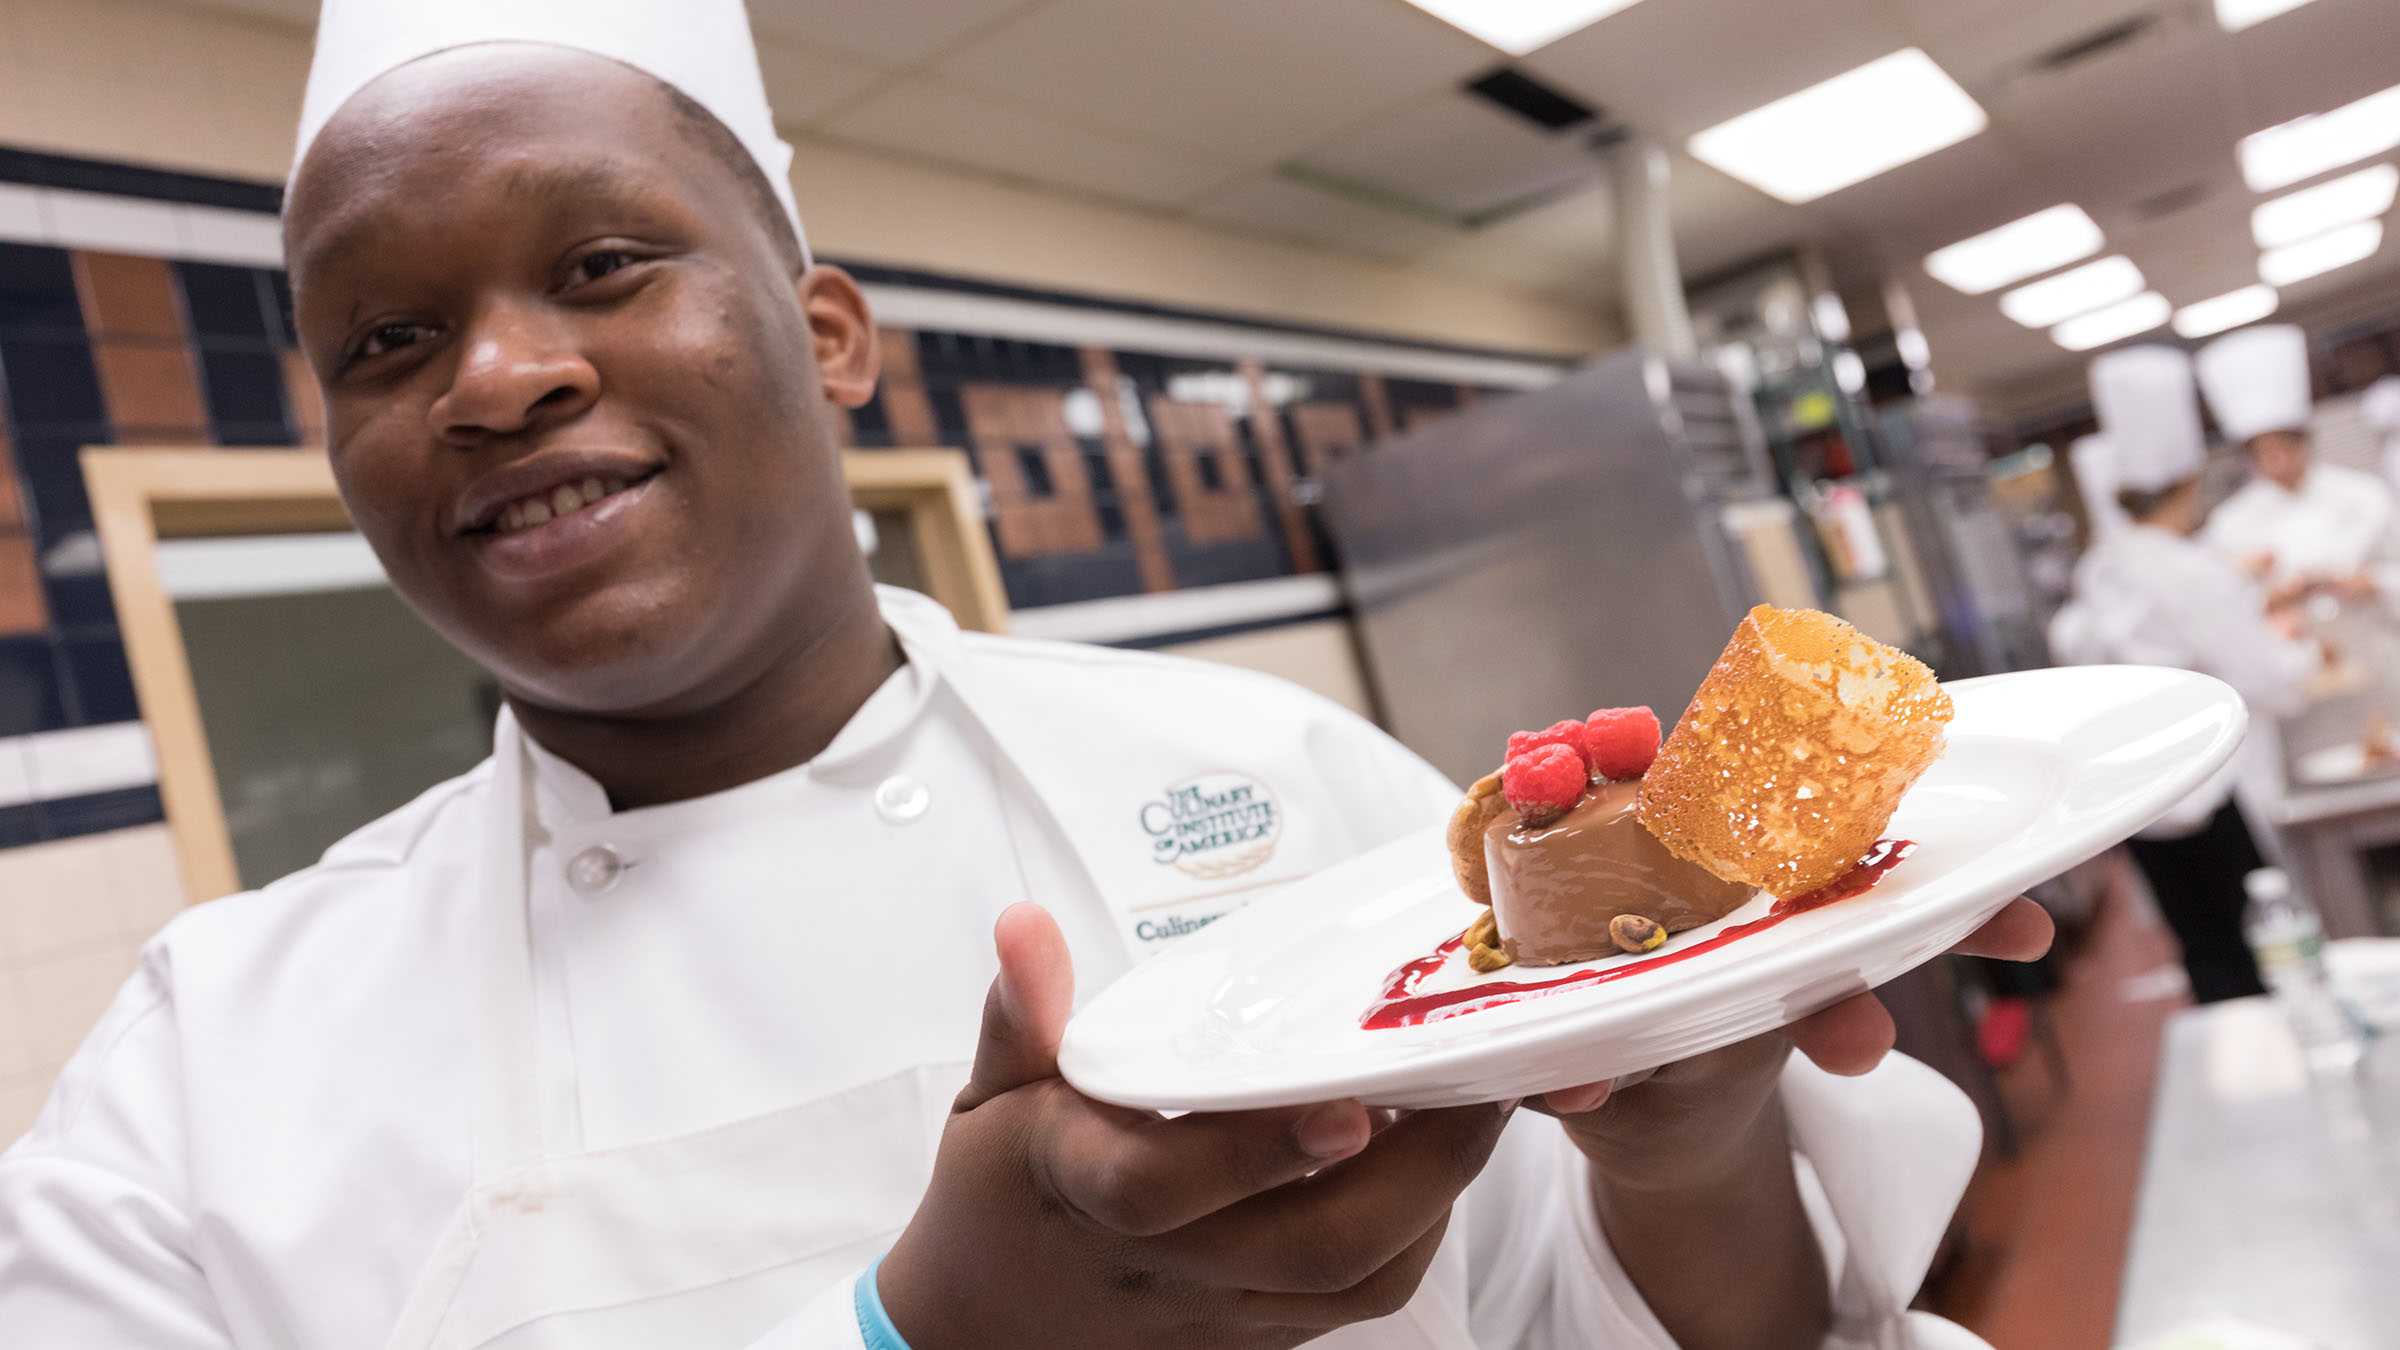 Student chef holding plate of dessert